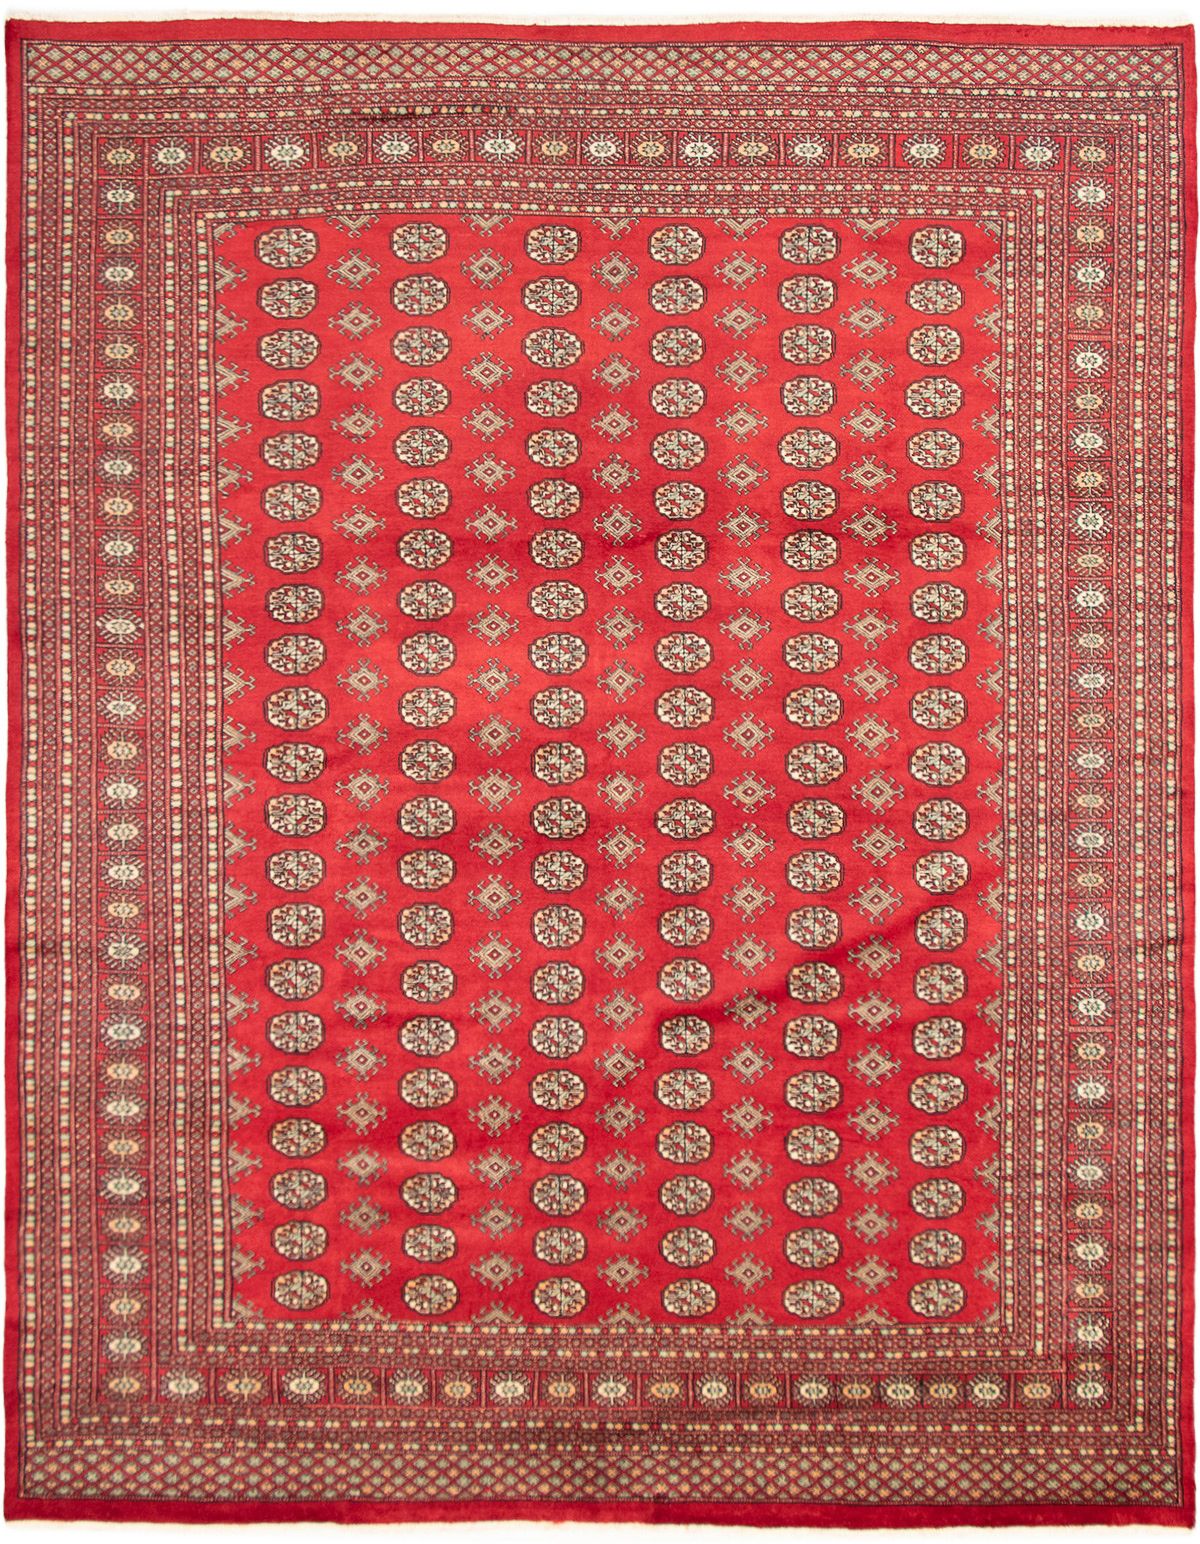 Hand-knotted Finest Peshawar Bokhara Red Wool Rug 9'2" x 11'9" Size: 9'2" x 11'9"  